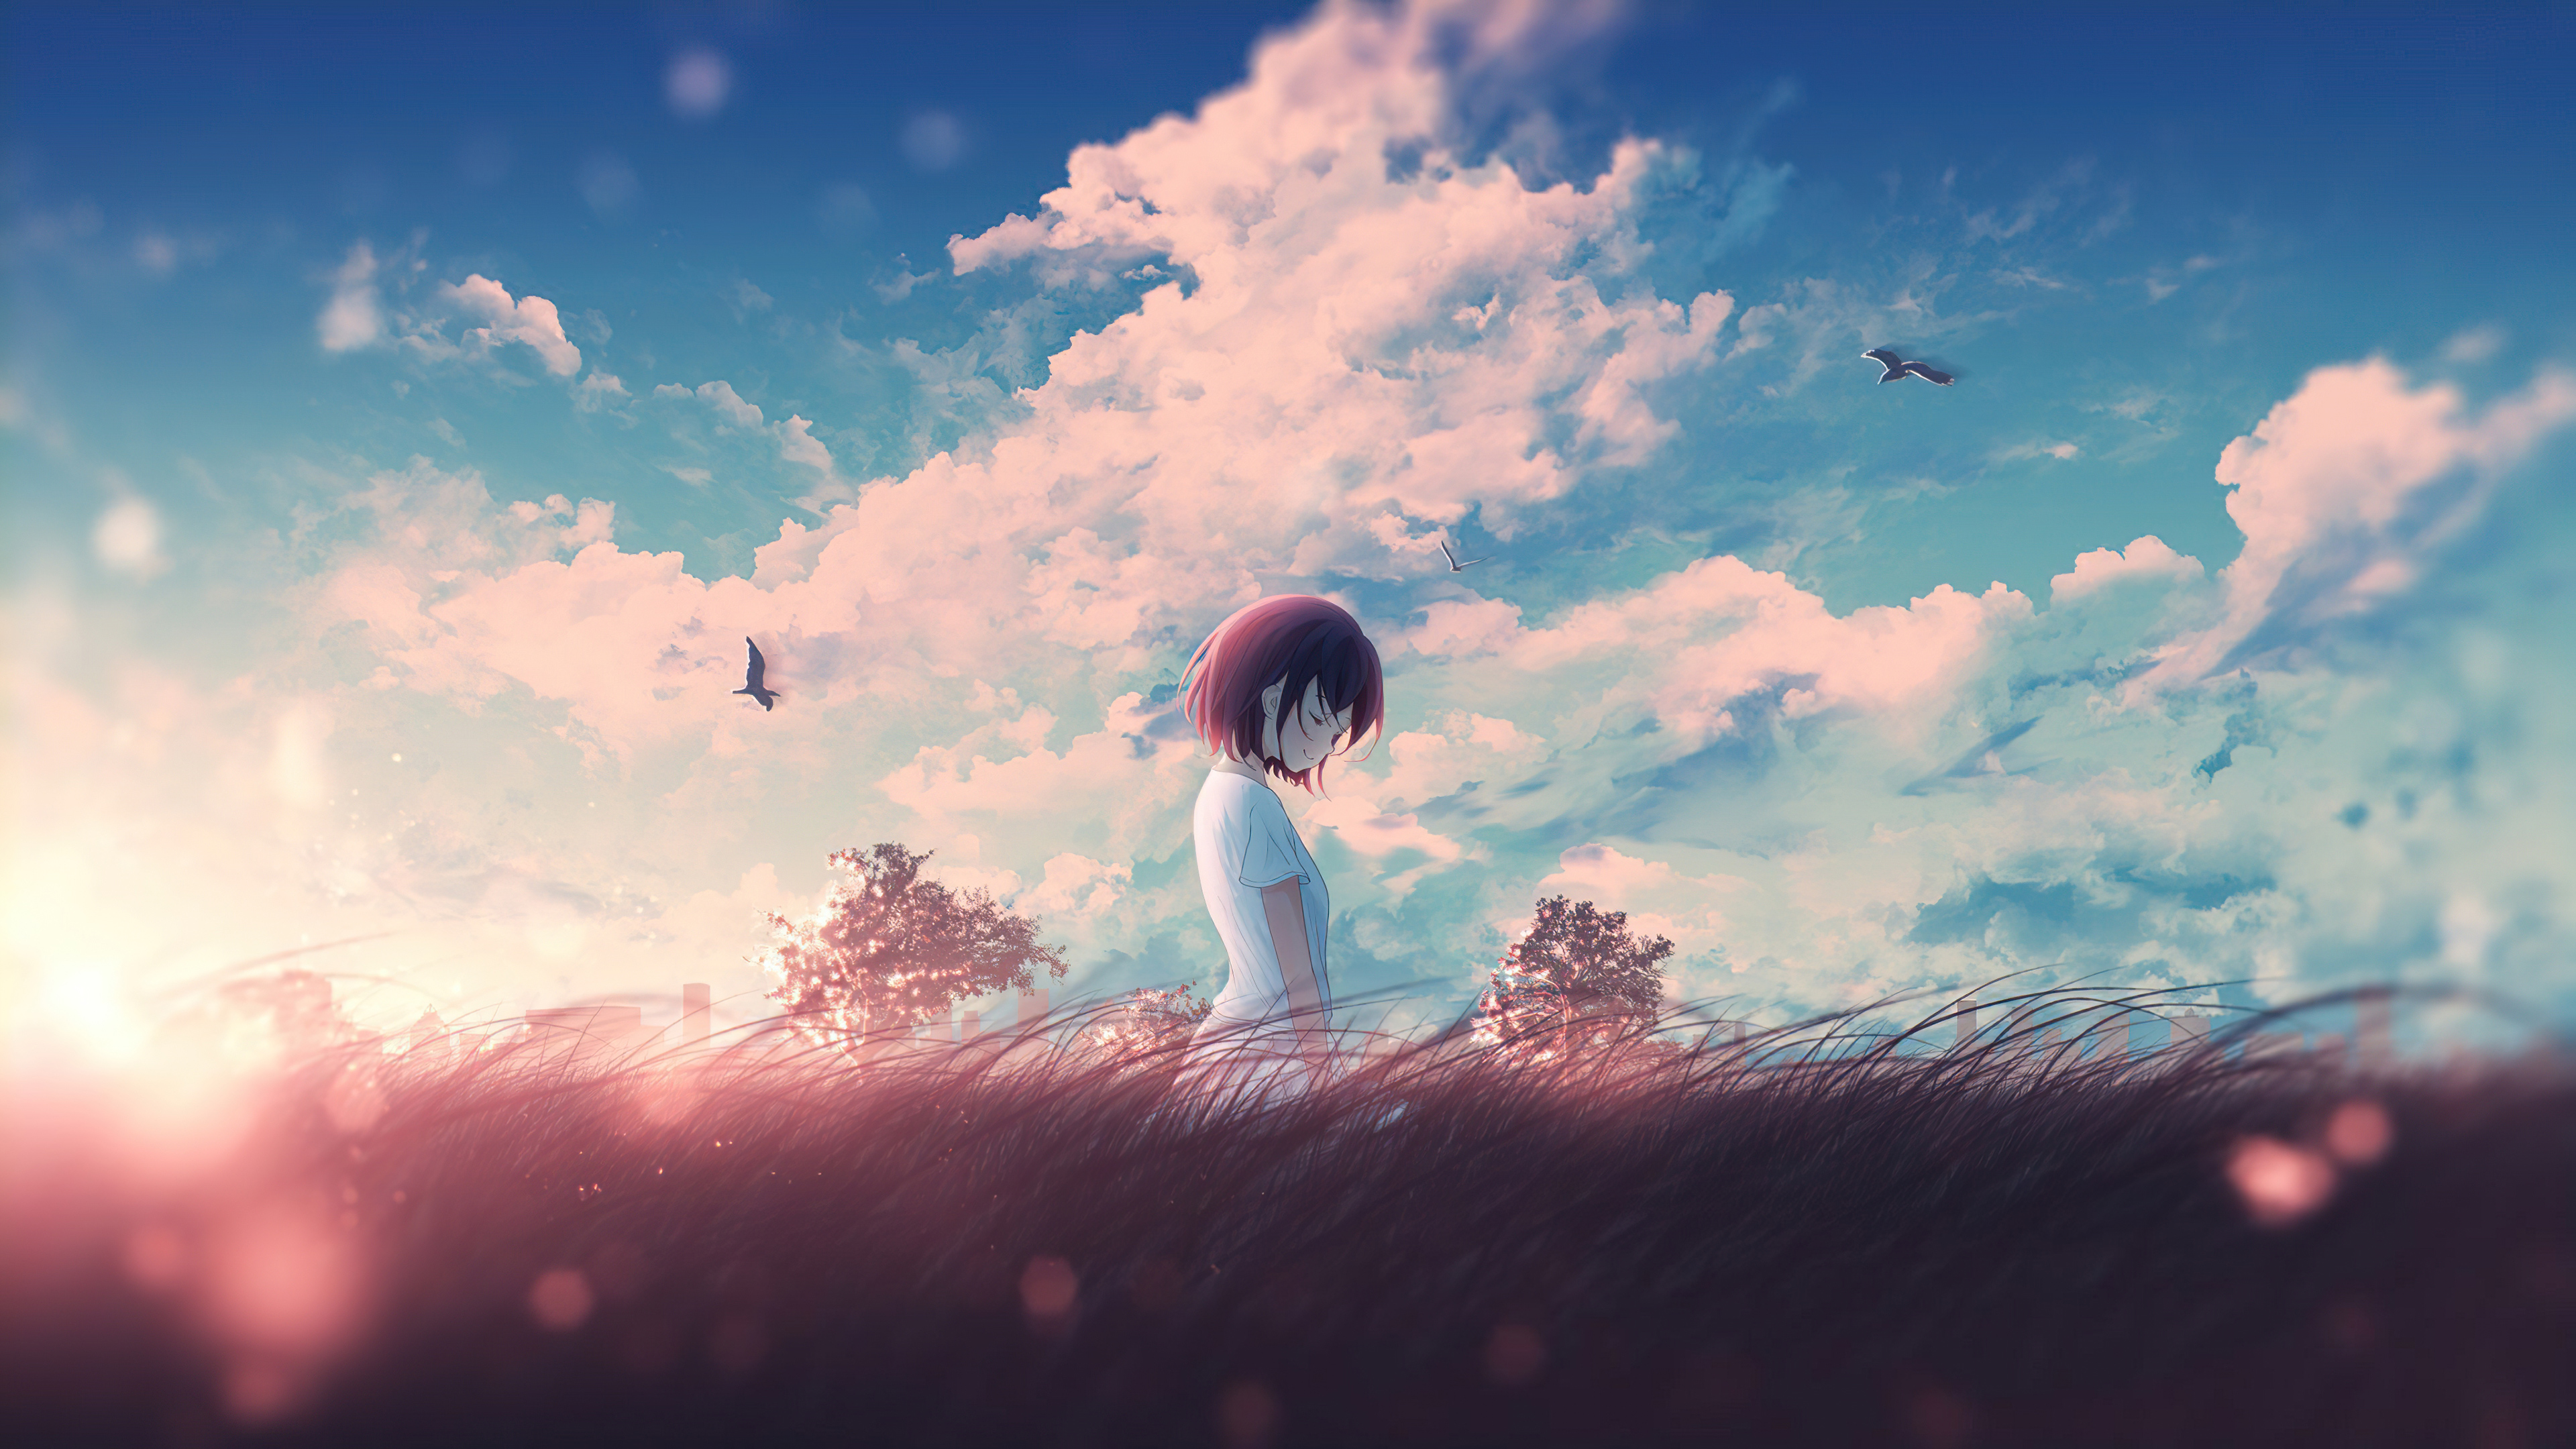 Young girl in nature scenery hd anime k wallpapers images backgrounds photos and pictures